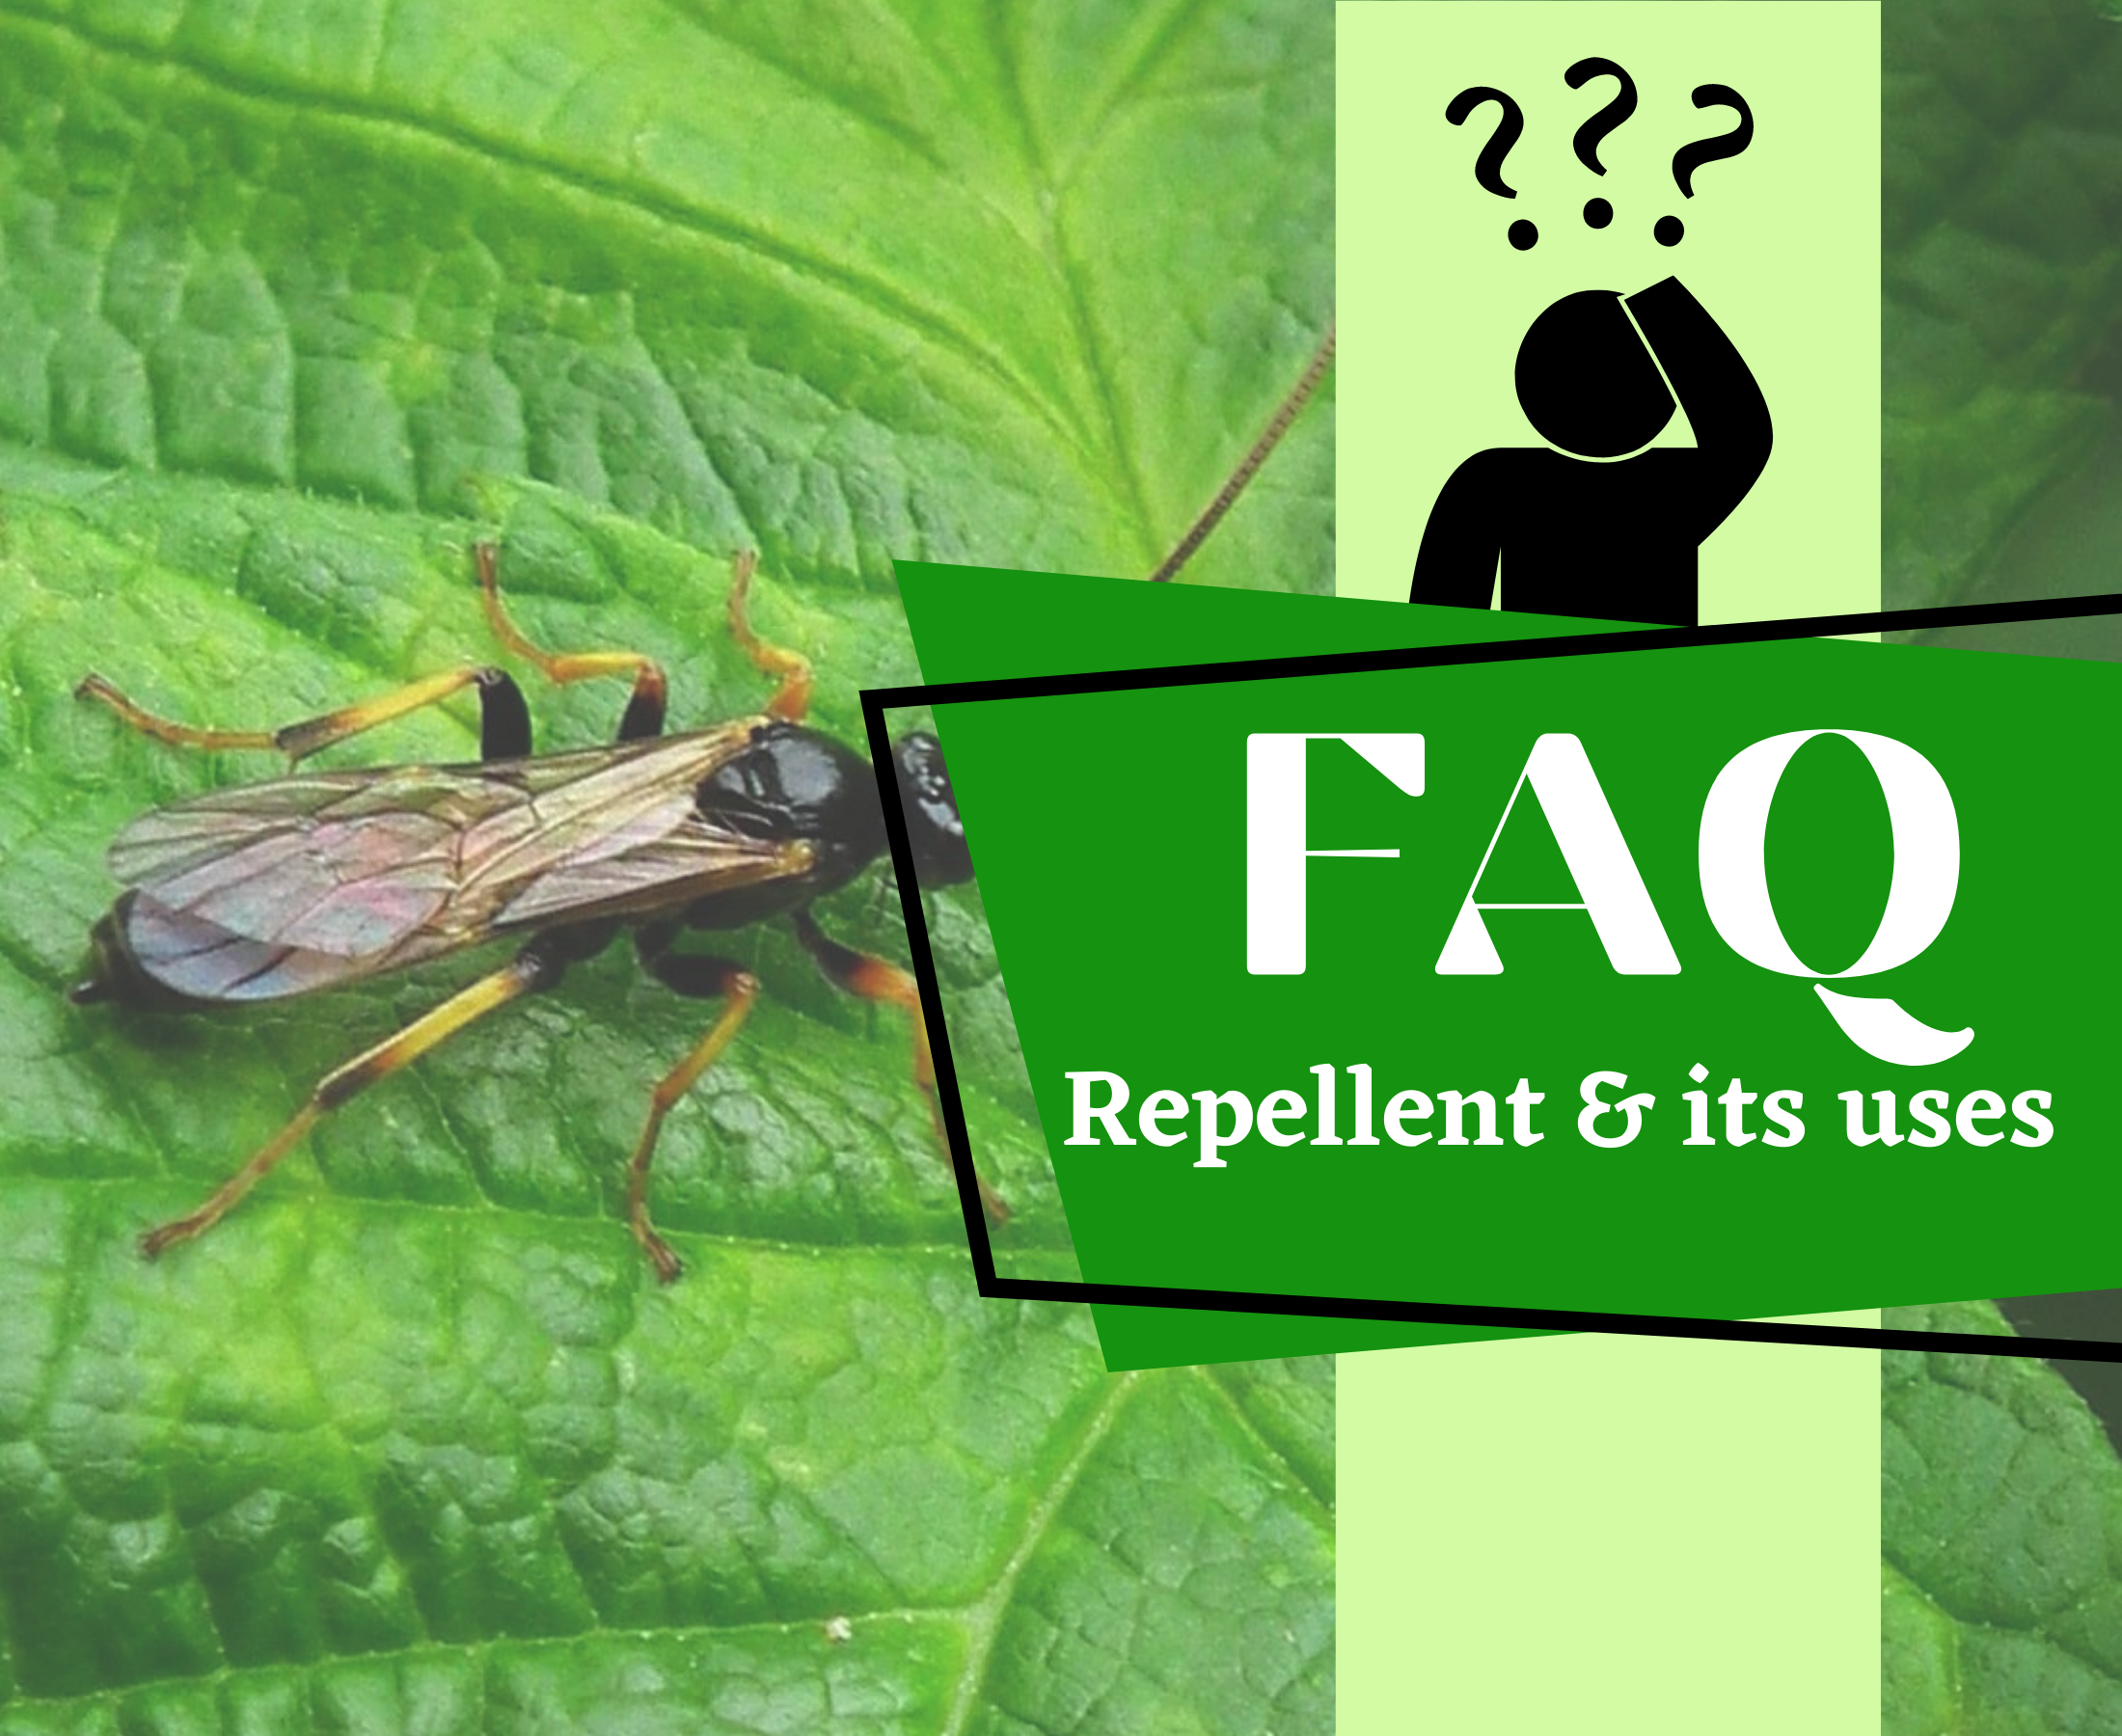 FAQ (Frequently asked question) about repellents and their uses